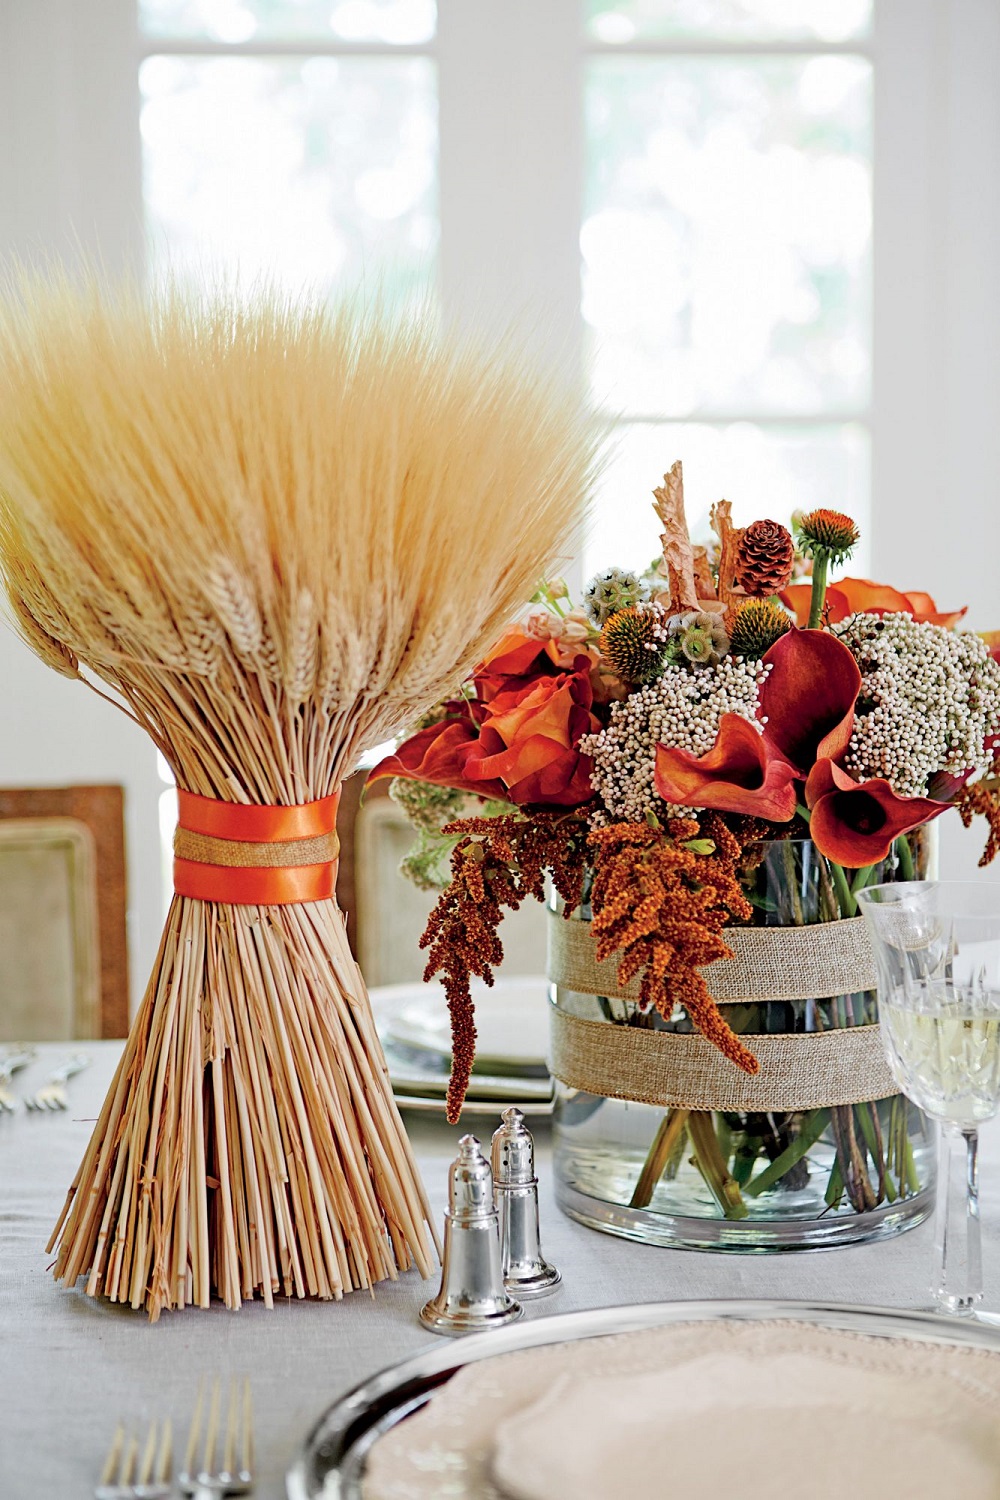 t3-71 Thanksgiving decorating ideas that will make your home look great